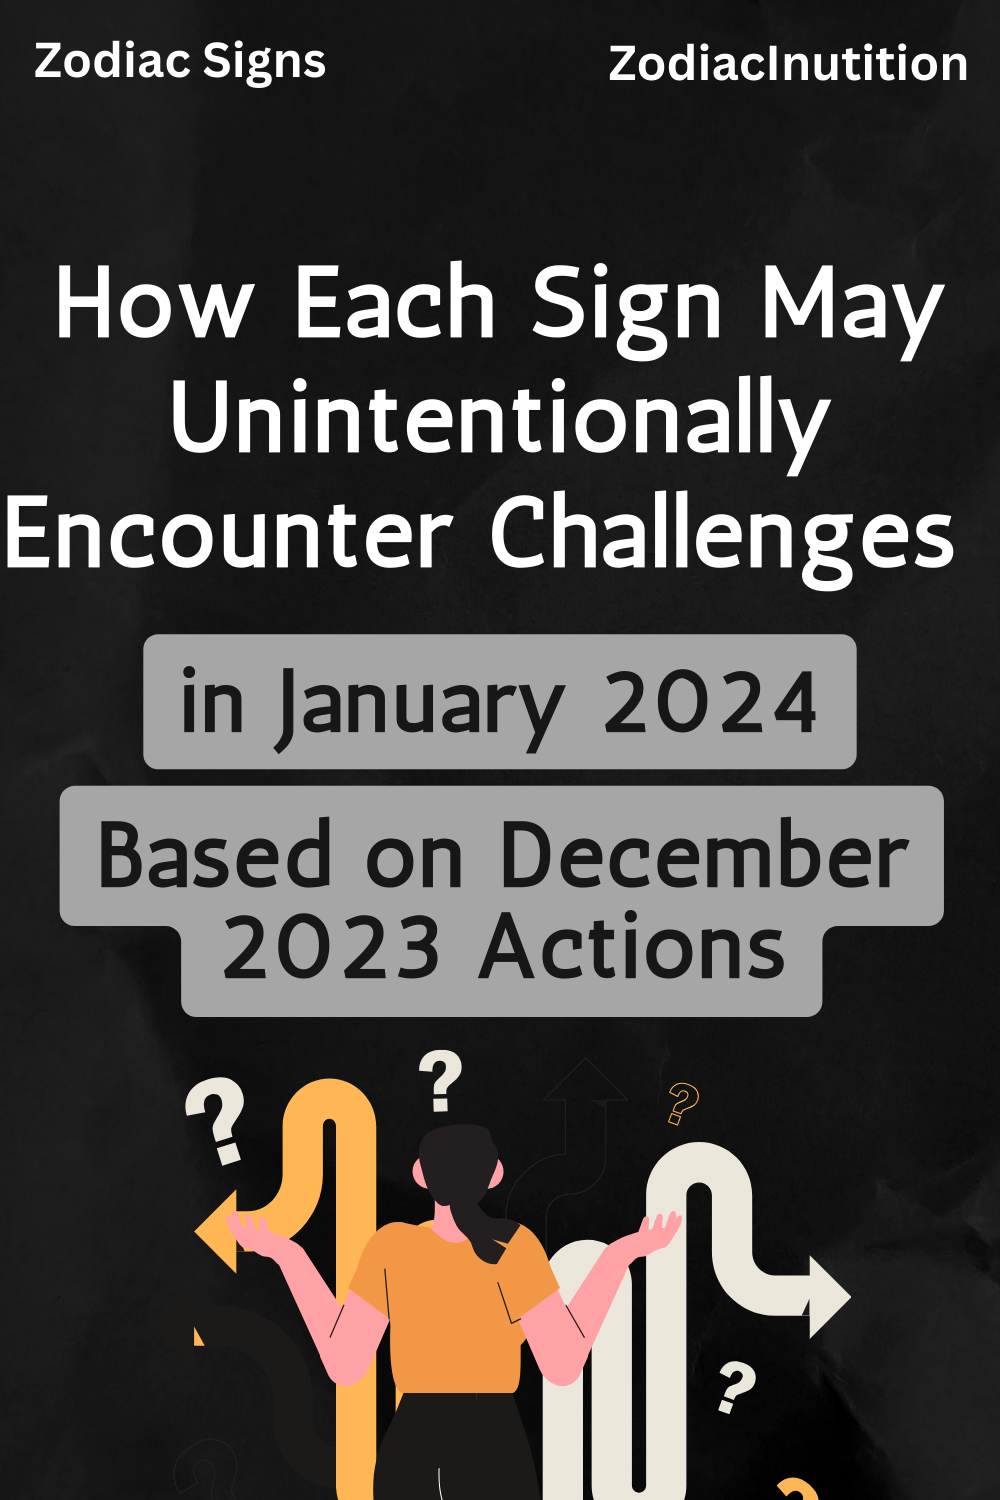 How Each Sign May Unintentionally Encounter Challenges in January 2024 Based on December 2023 Actions